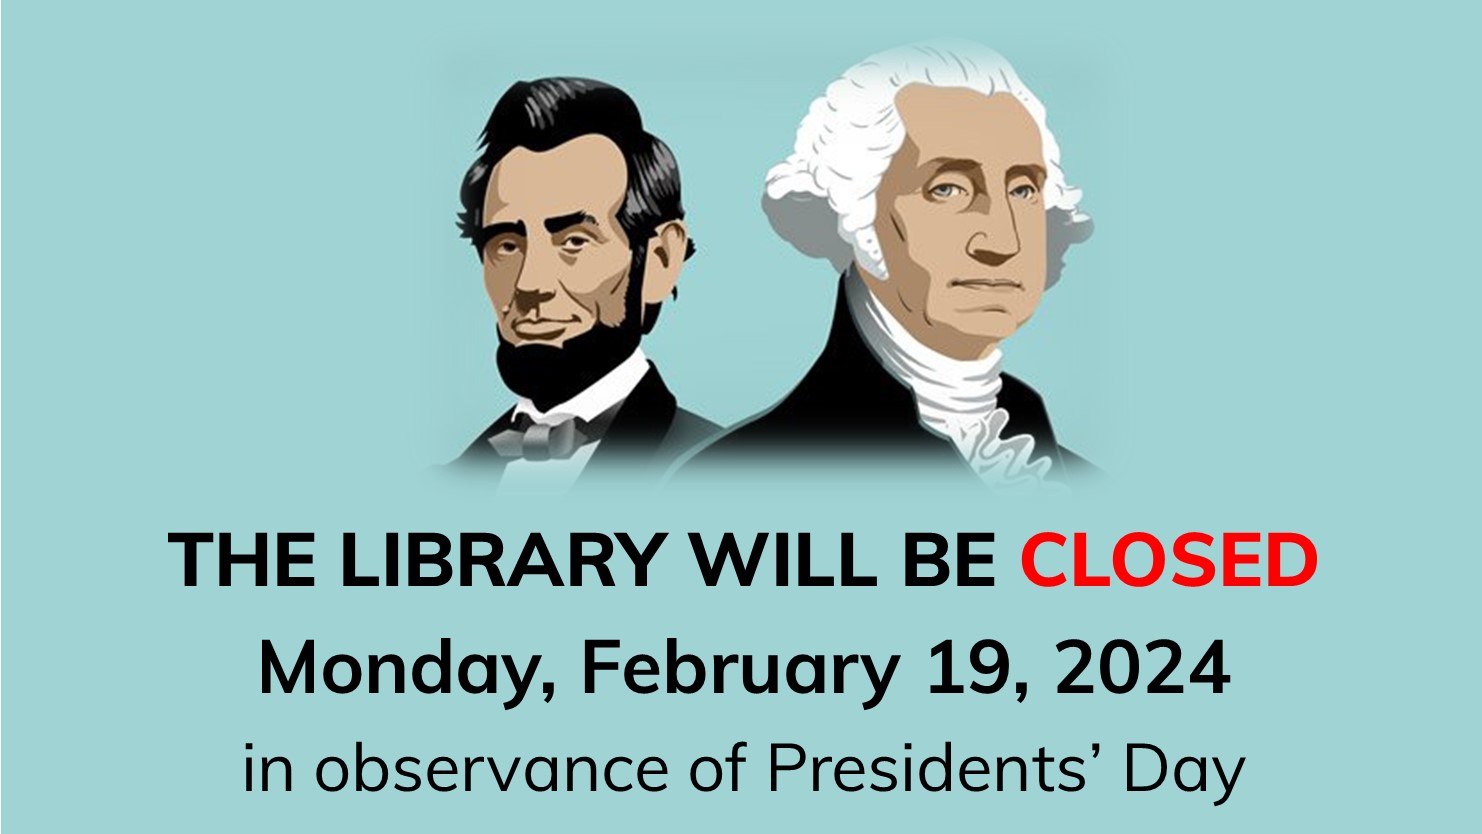 The Library will be closed Monday, February 19, 2024 in observance of President's Day.